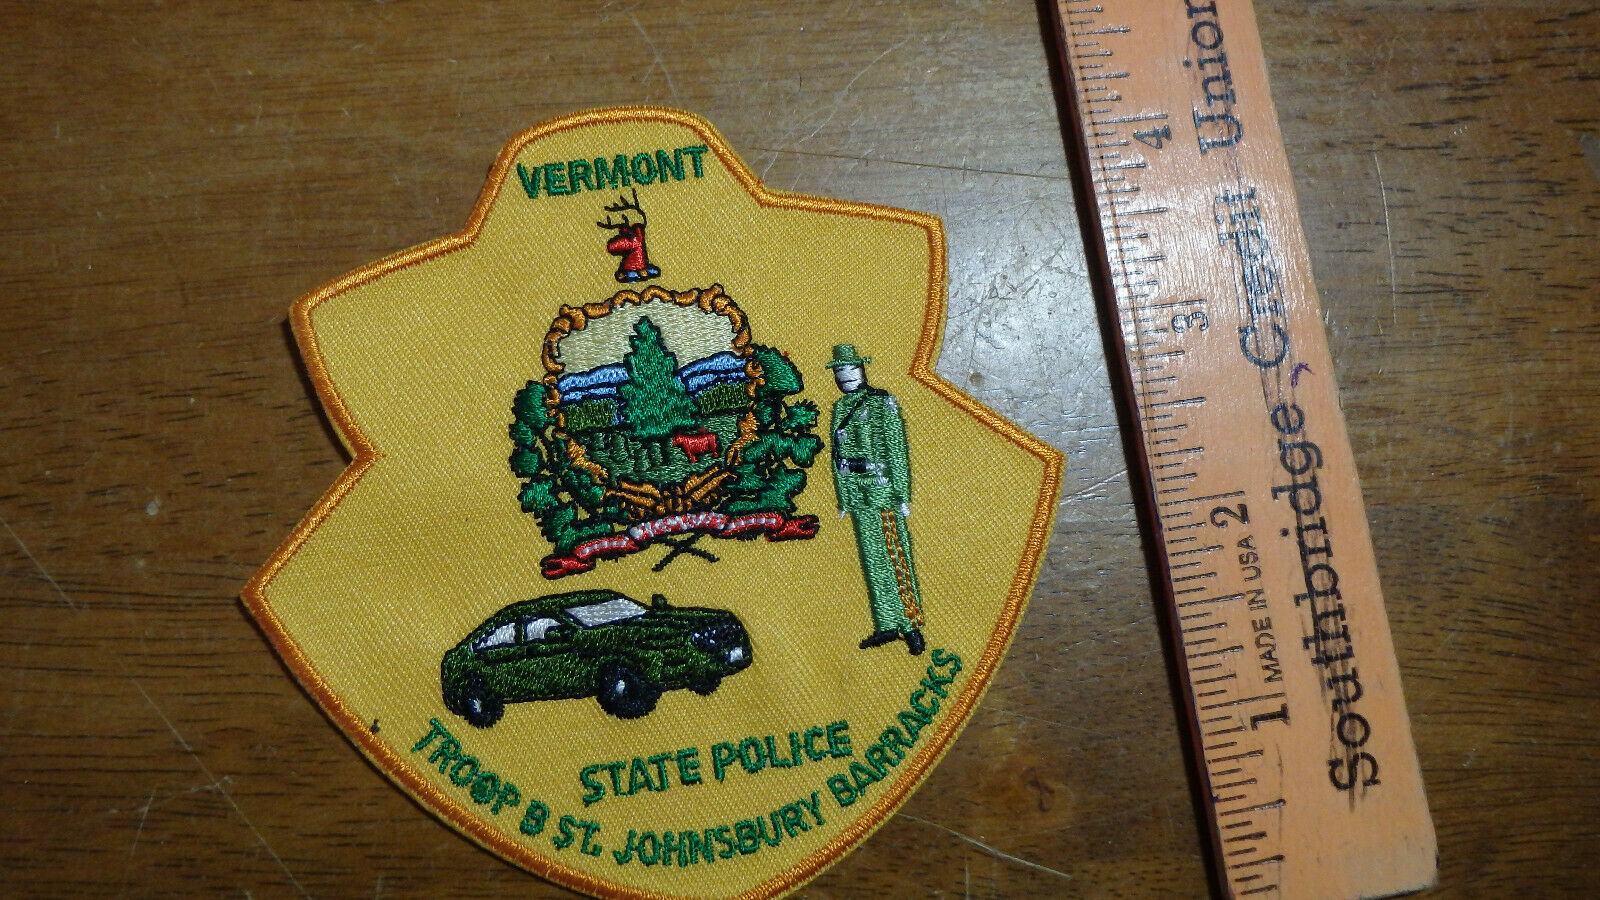 VERMONT STATE POLICE TROOP B ST. JOHNSBURY BARRACKS OBSOLETE PATCH BX 10#7